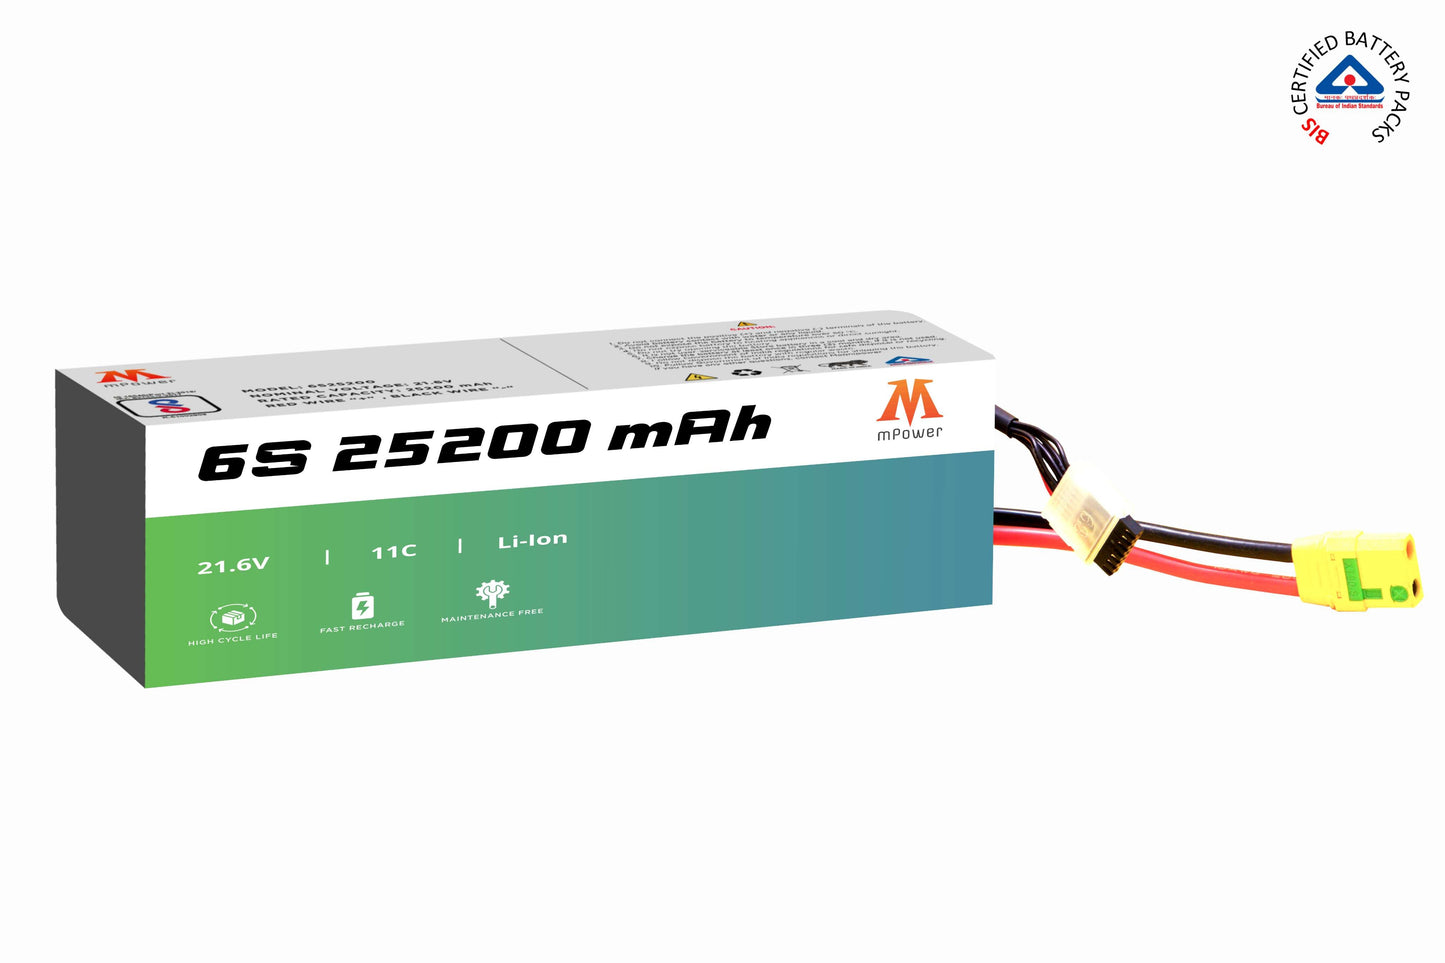 mPower 6S 25200mAh Lithium-Ion Battery for Surveillance Drones